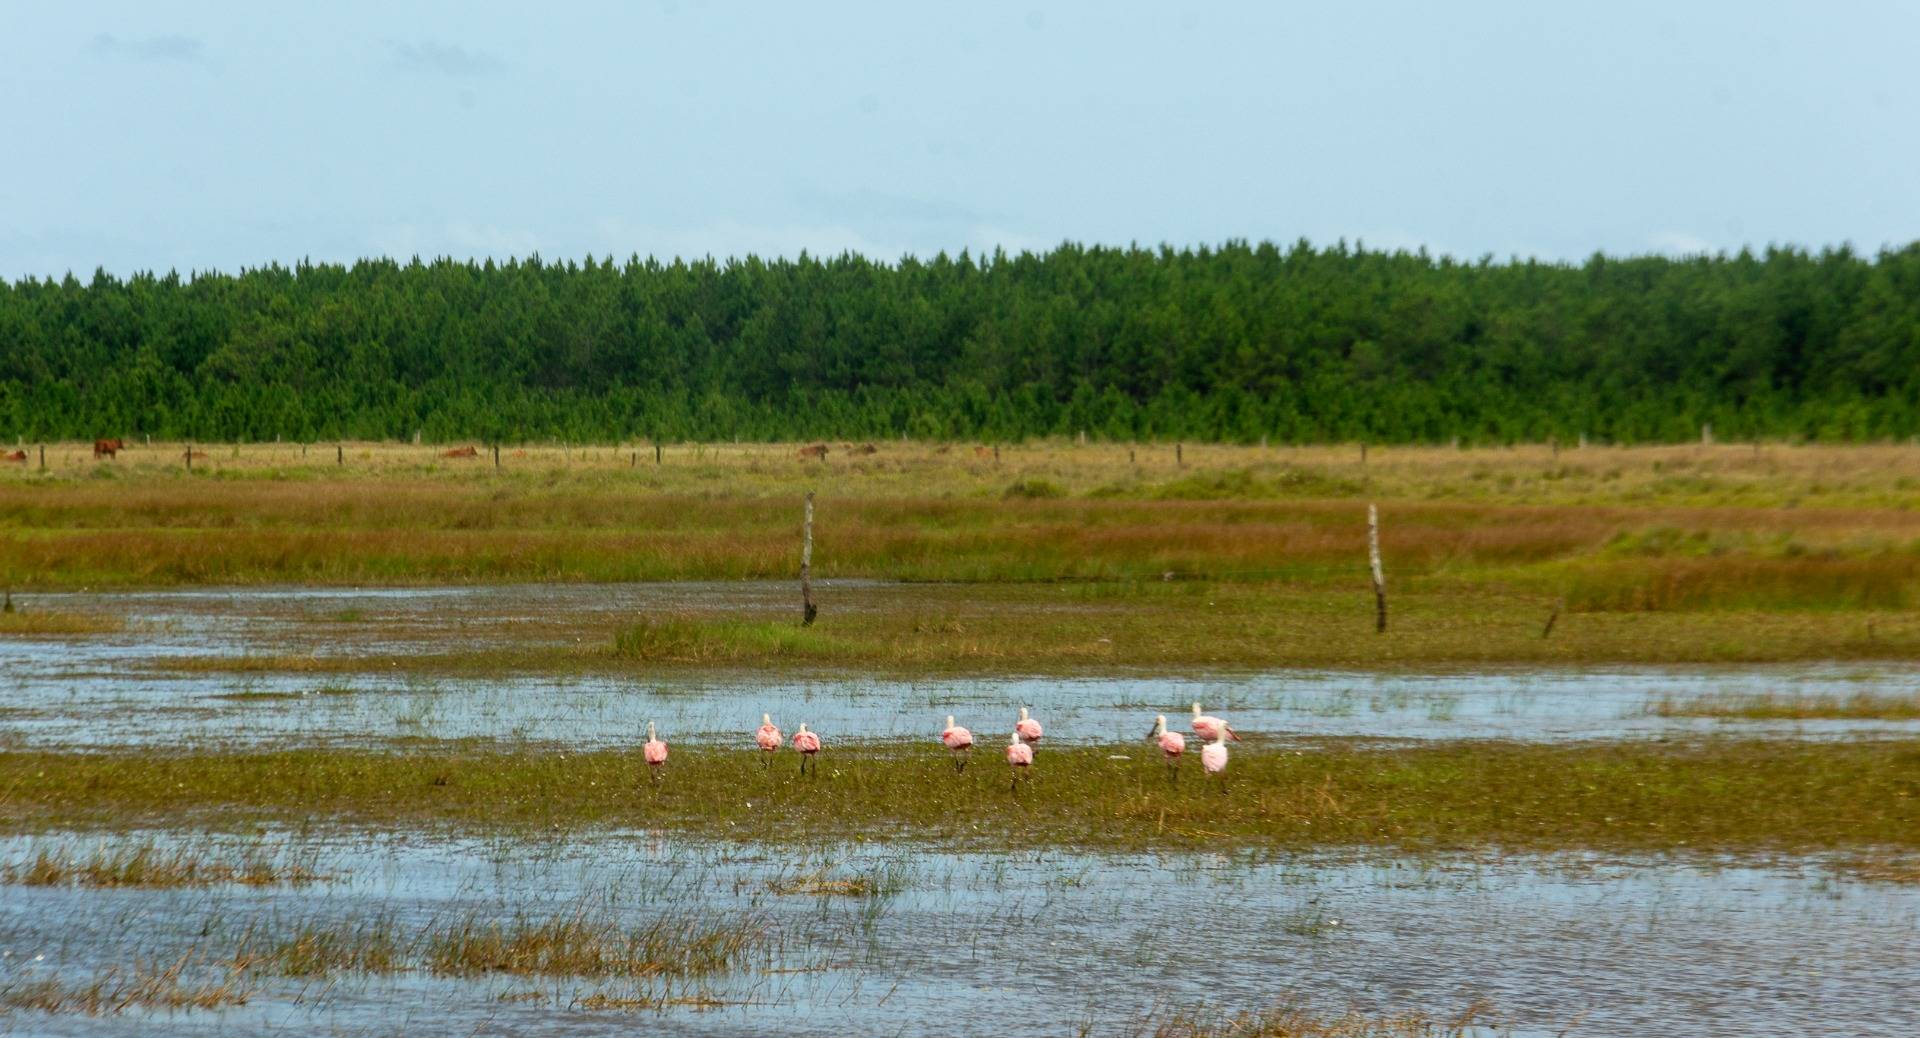 Flamingos by the road